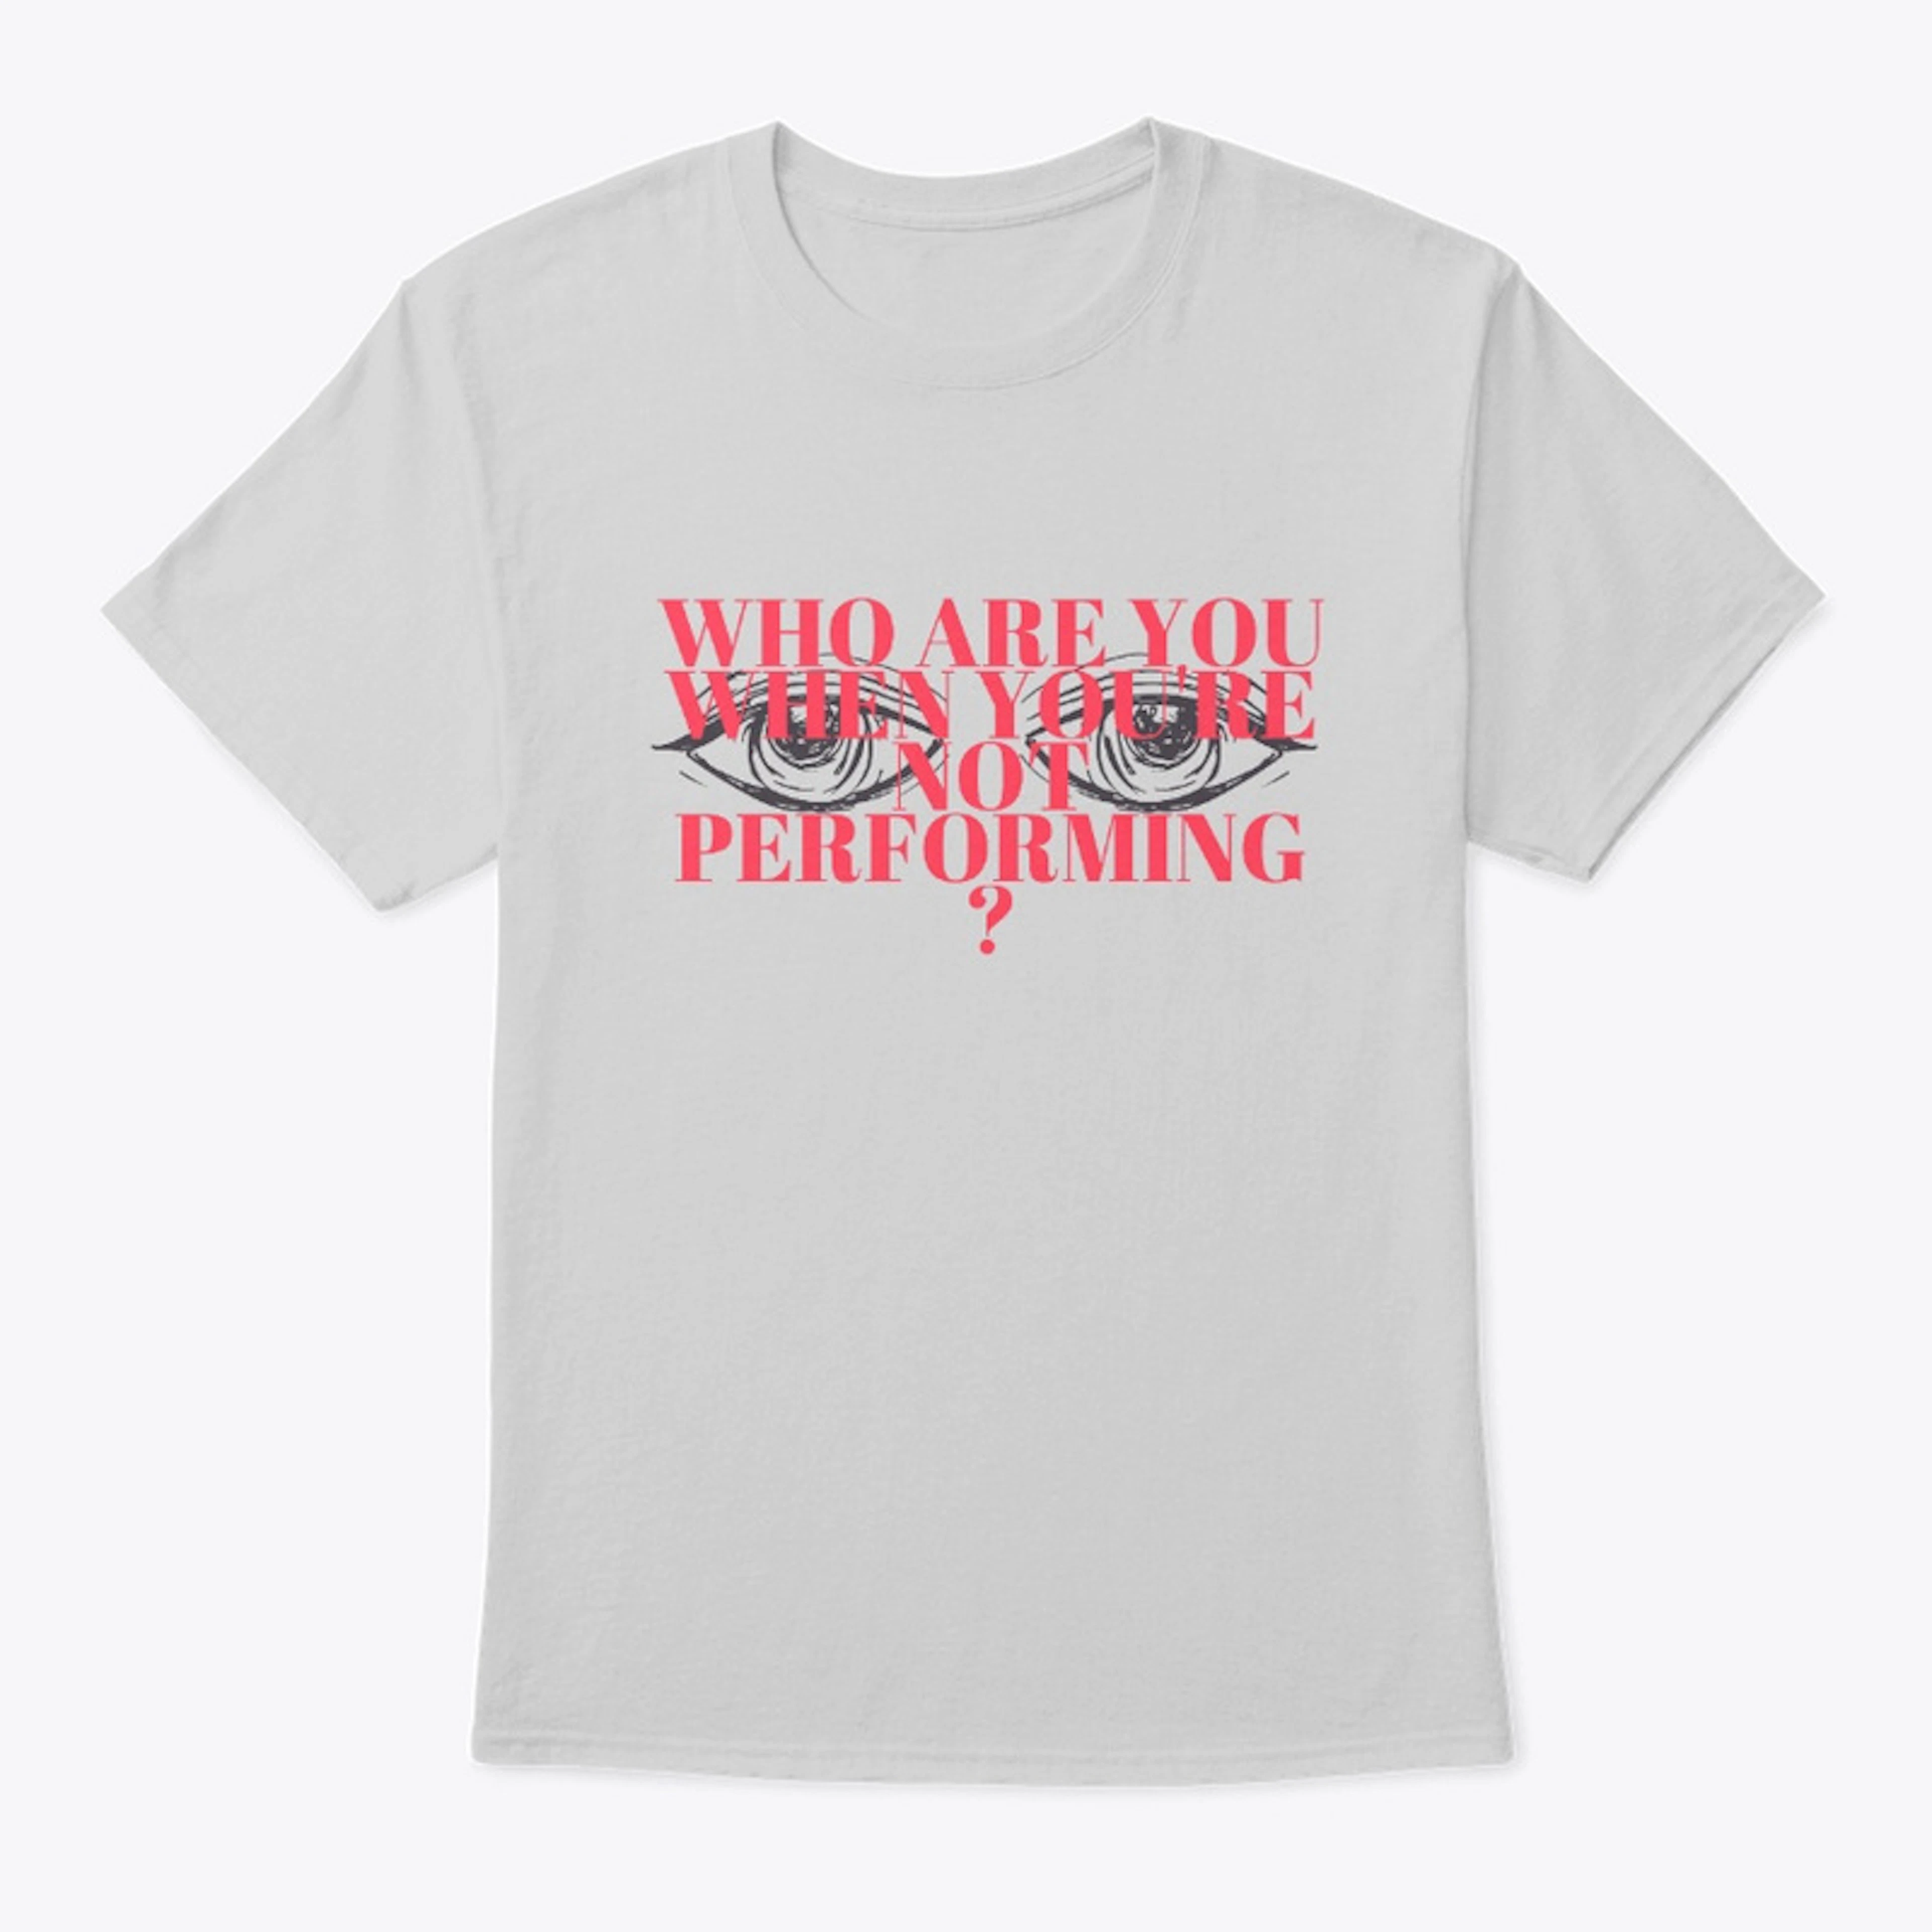 Who Are You When You're Not Performing?